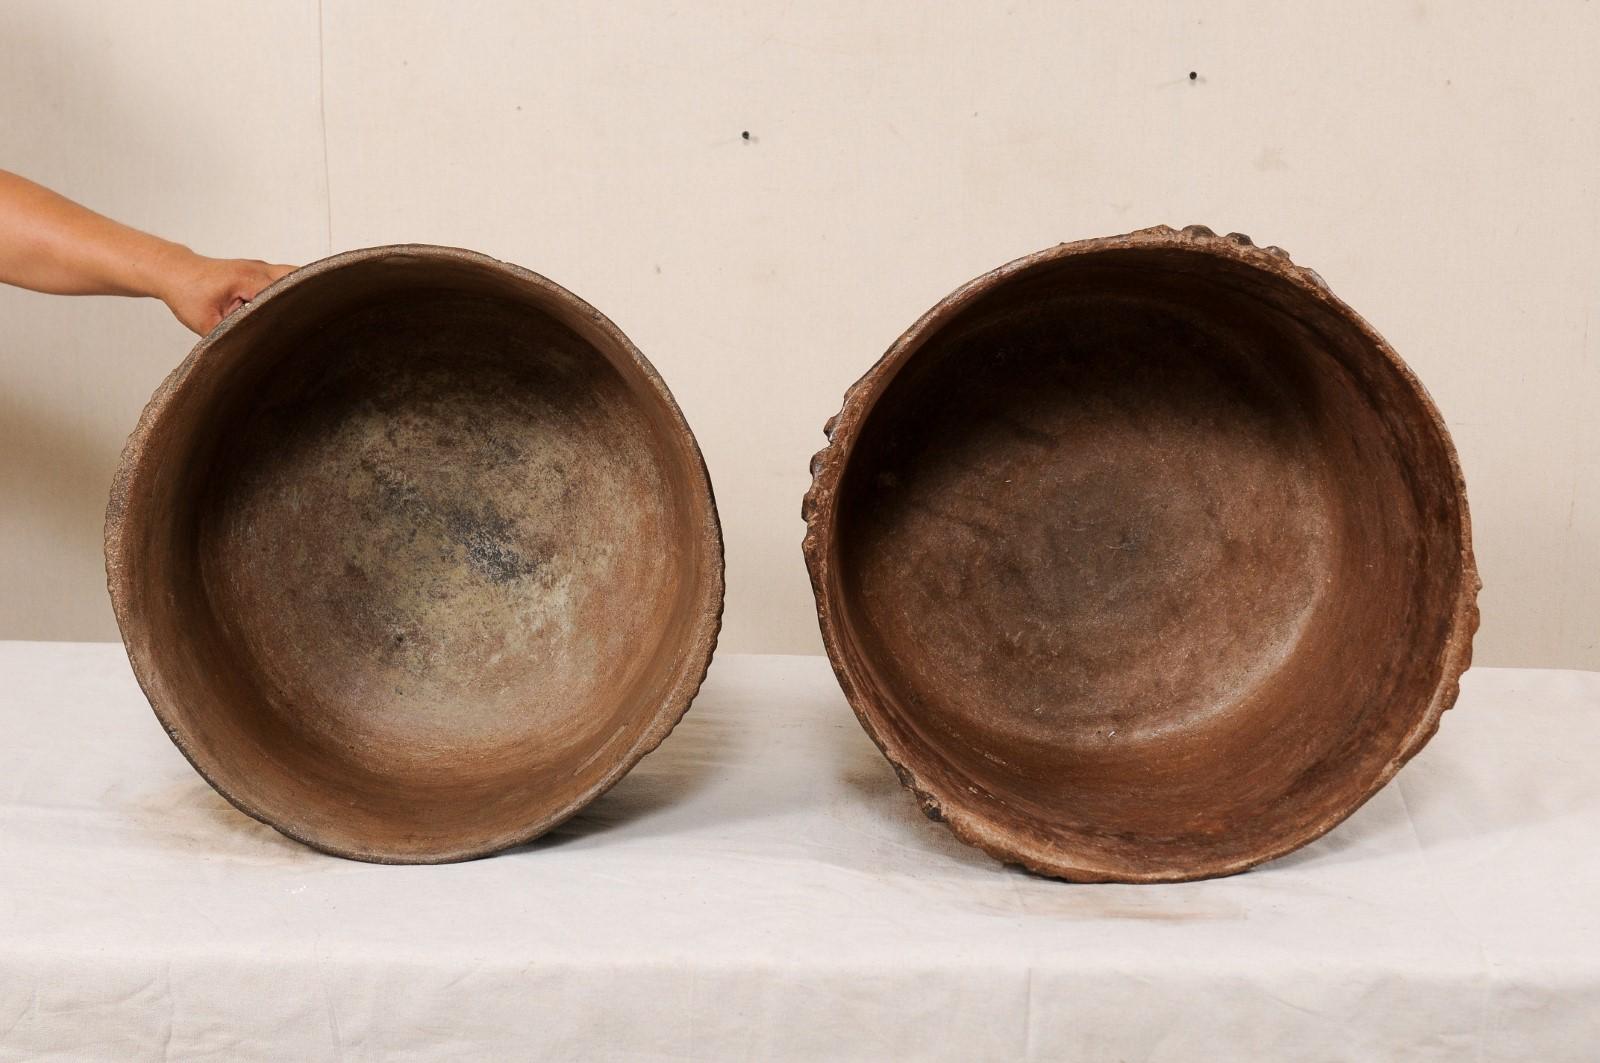 Pair of Guatemalan Clay Cooking Pots from the Early 20th Century For Sale 3